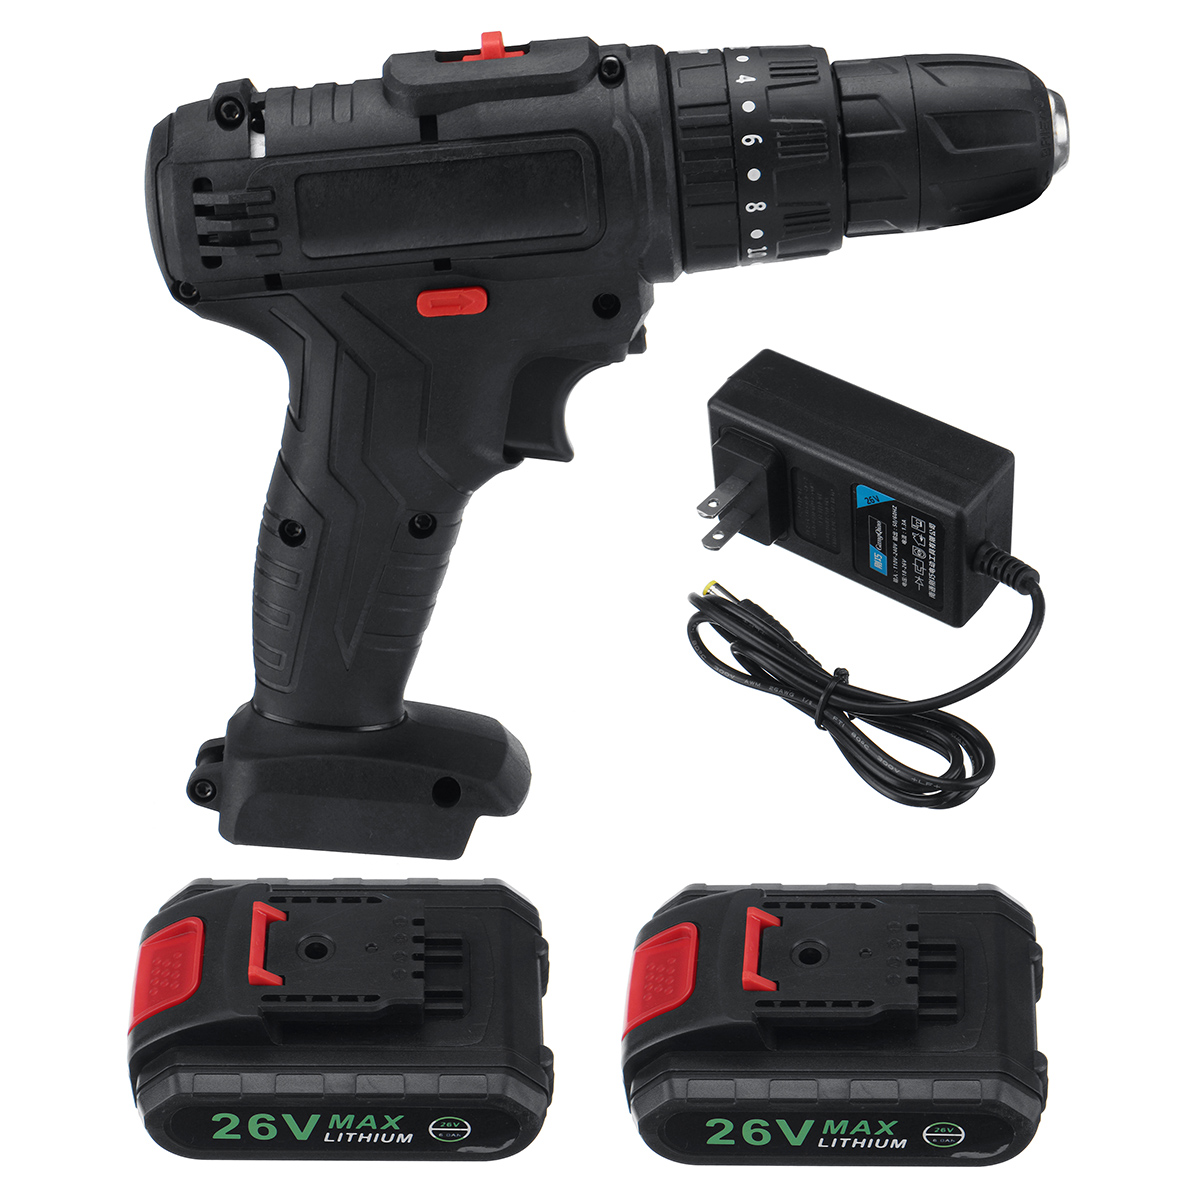 48V-1500W-Impact-Electric-Drill-28Nm-Max-Torque-LED-Light-Screwdriver-Power-W-12pc-Battery-1768847-1